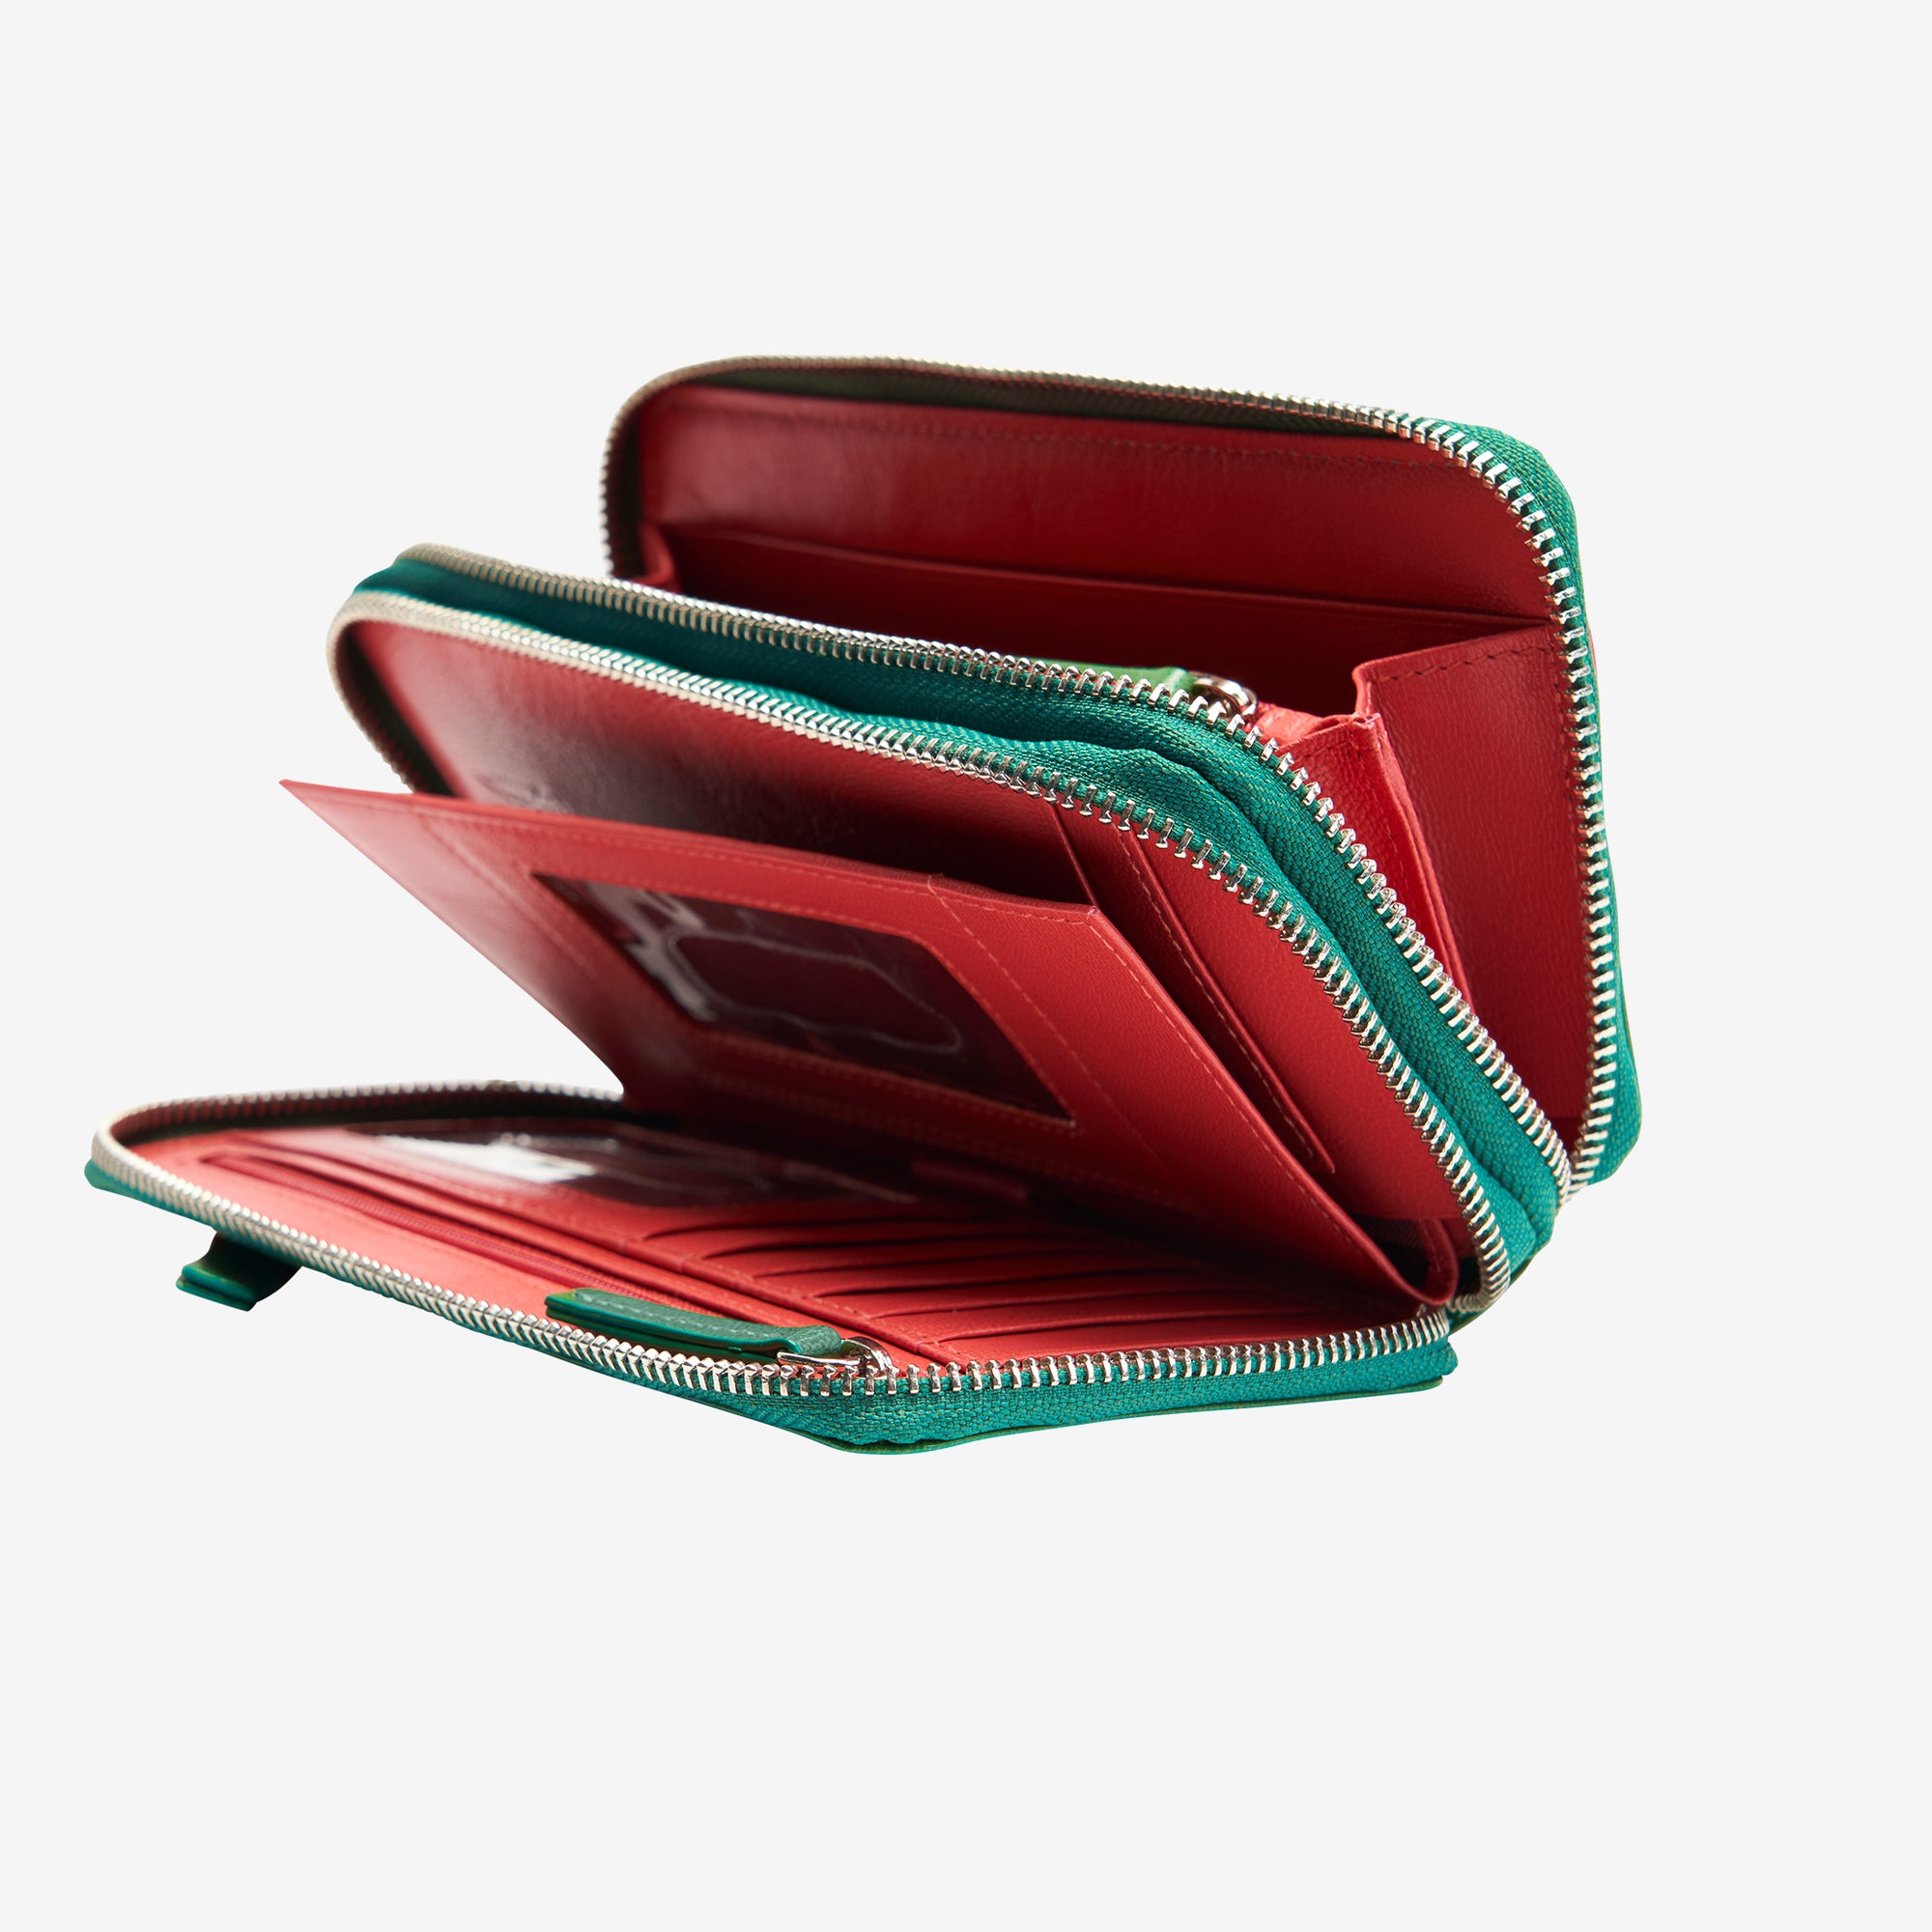     tusk-443-leather-double-zip-wallet-emerald-and-geranium-front